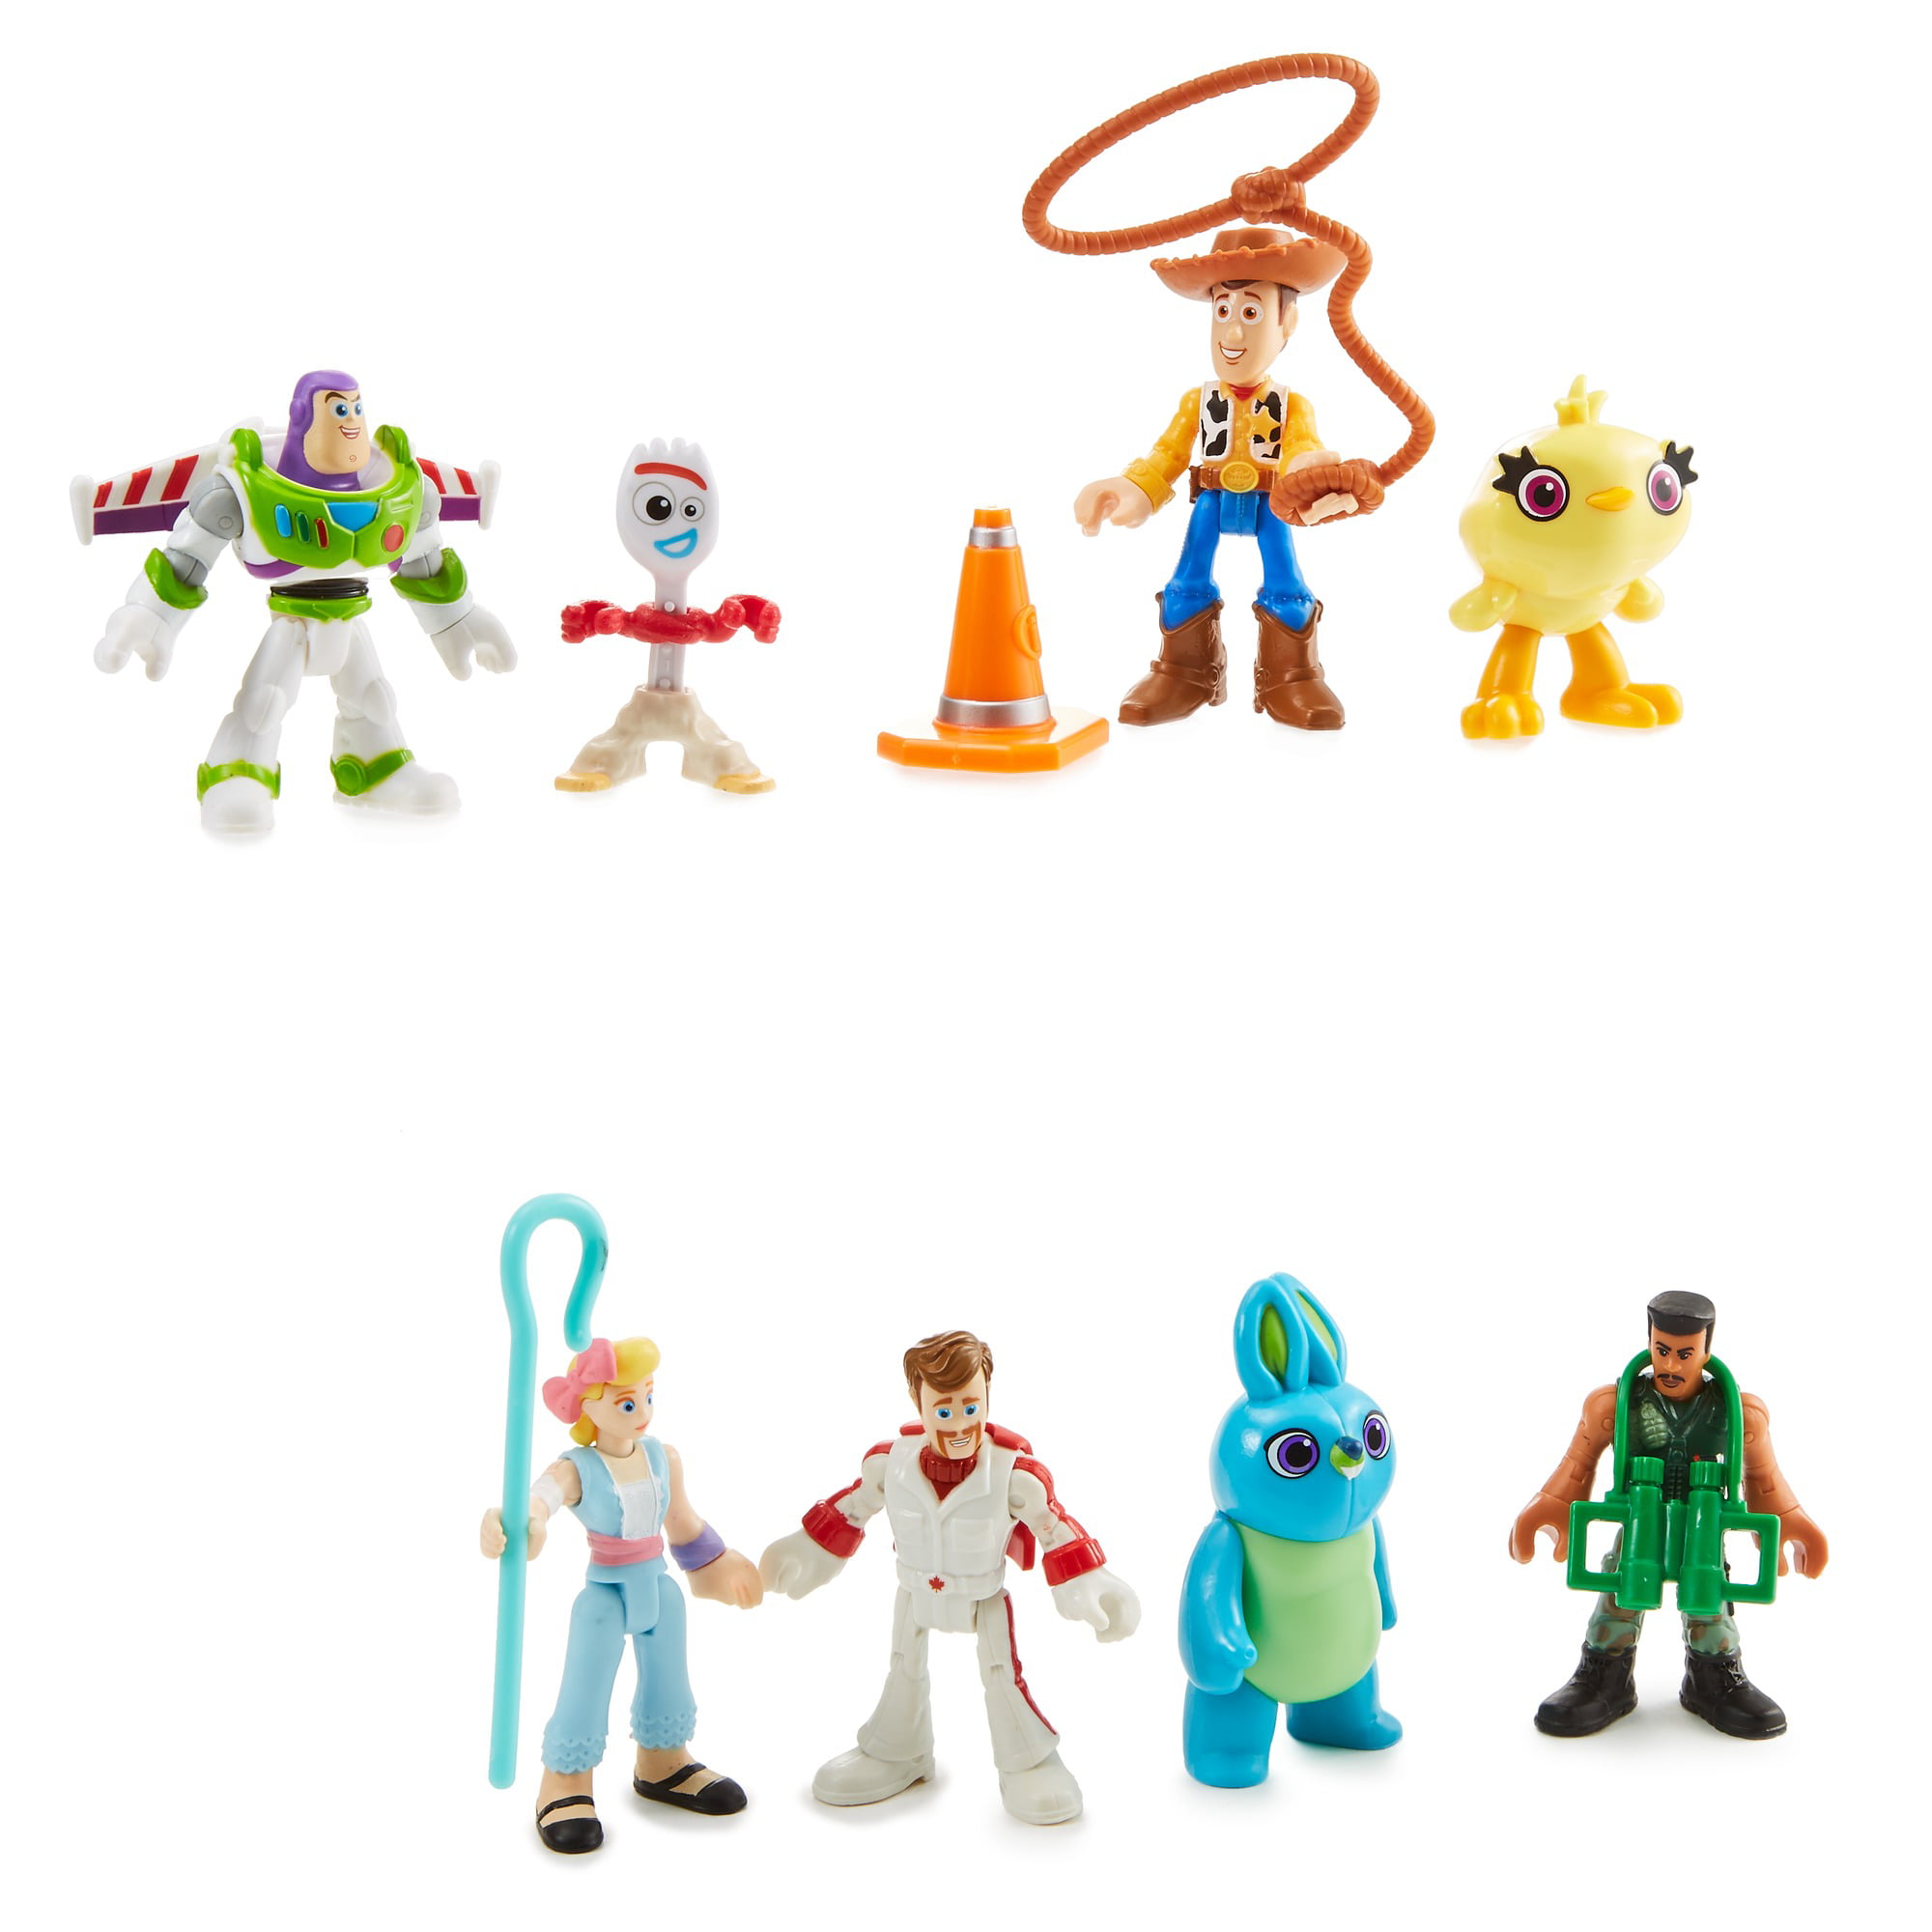 Imaginext Toy Story Deluxe Figure Pack of 8 Figures 2.5 with Forky